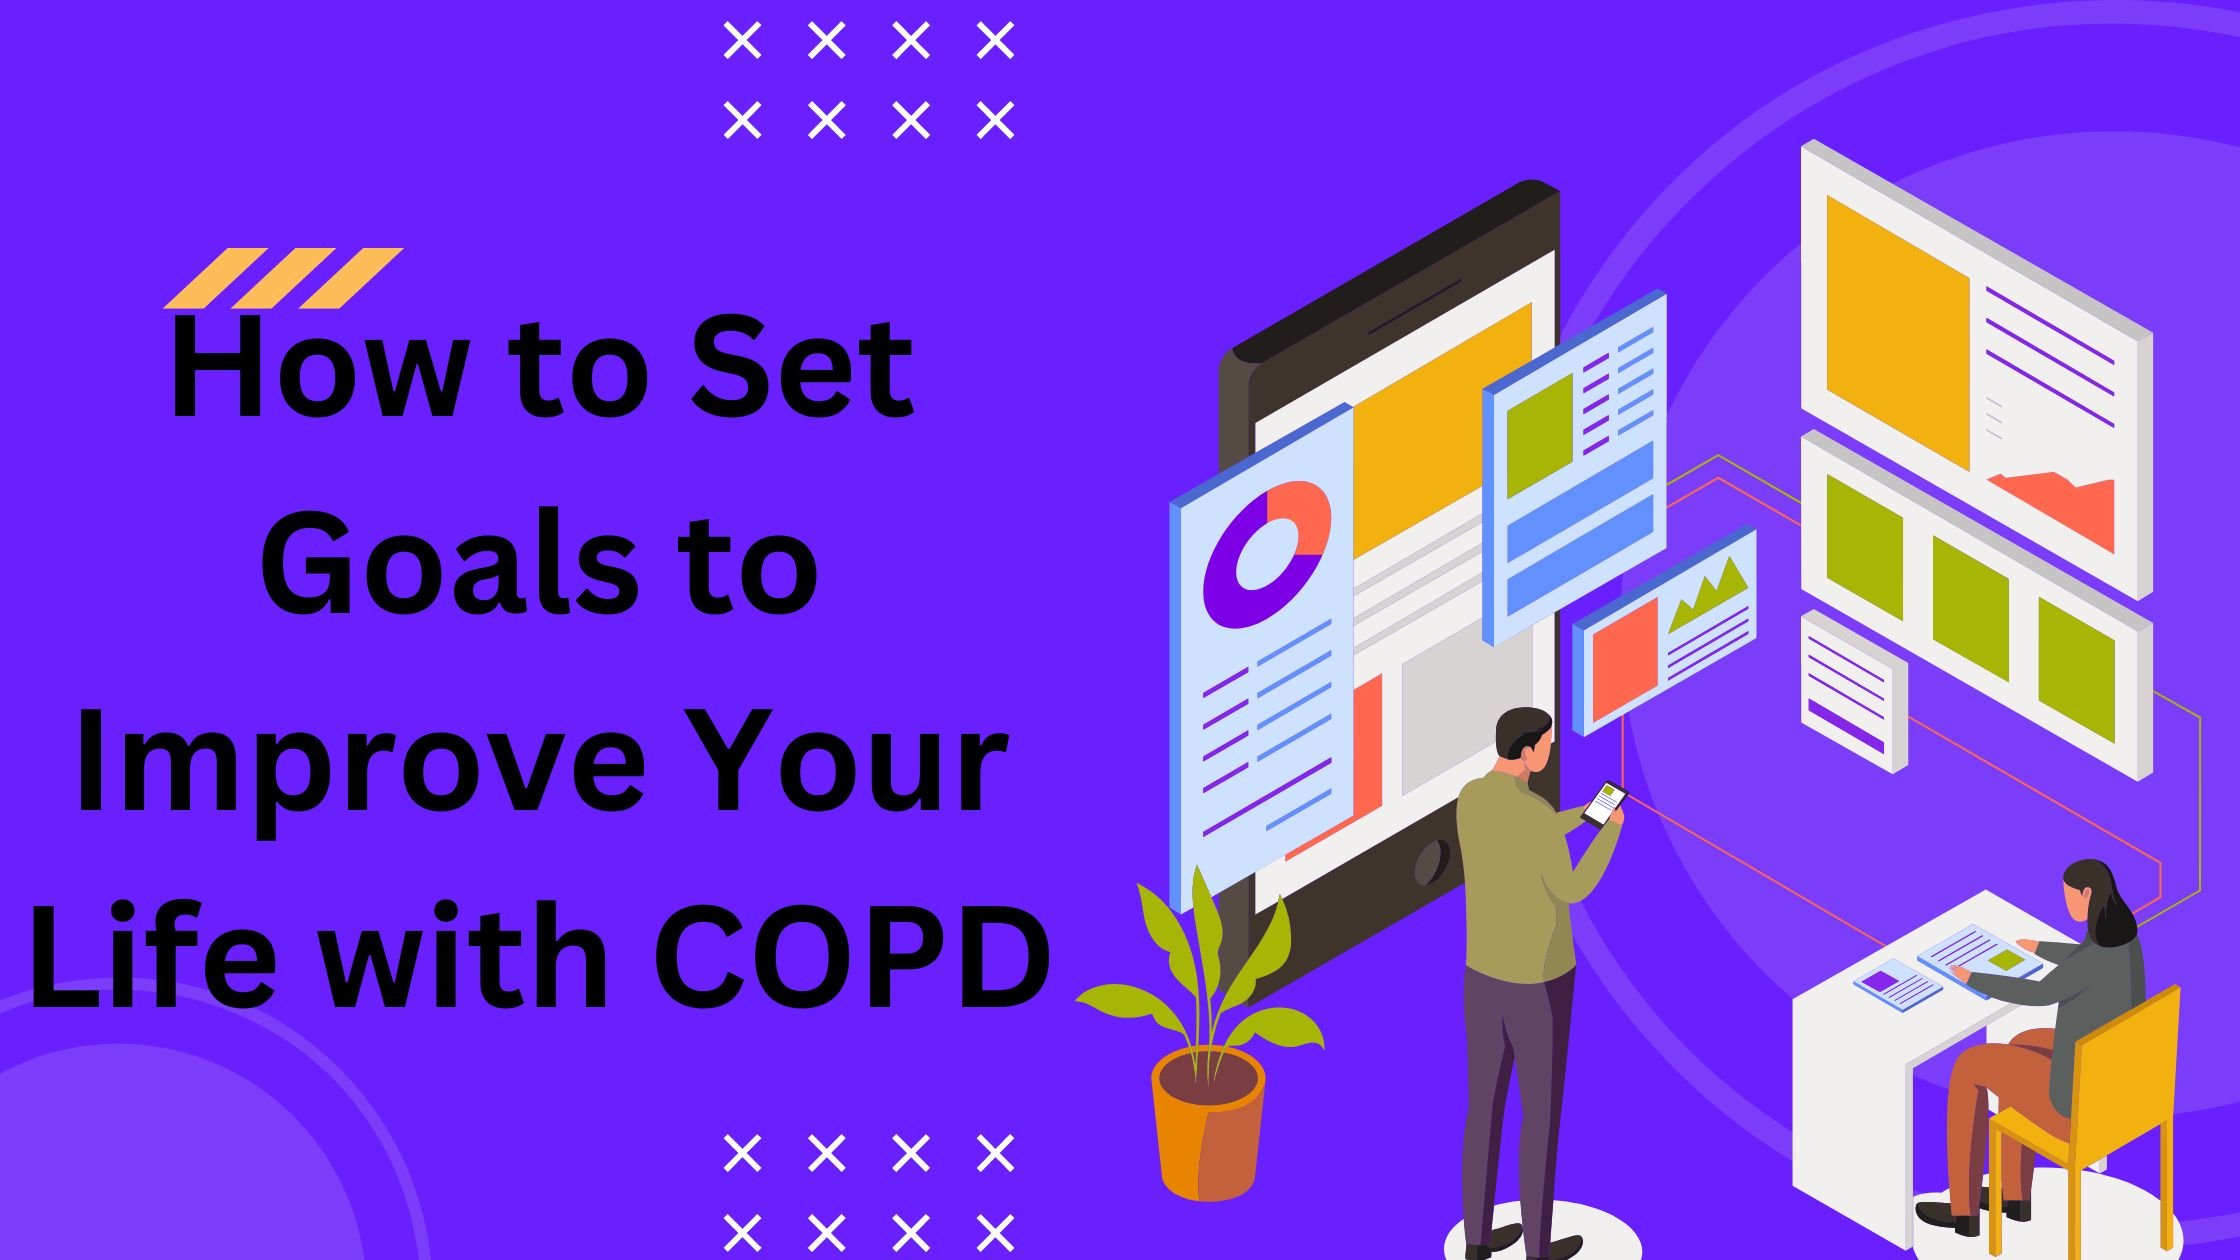 How to Set Goals to Improve Your Life with COPD